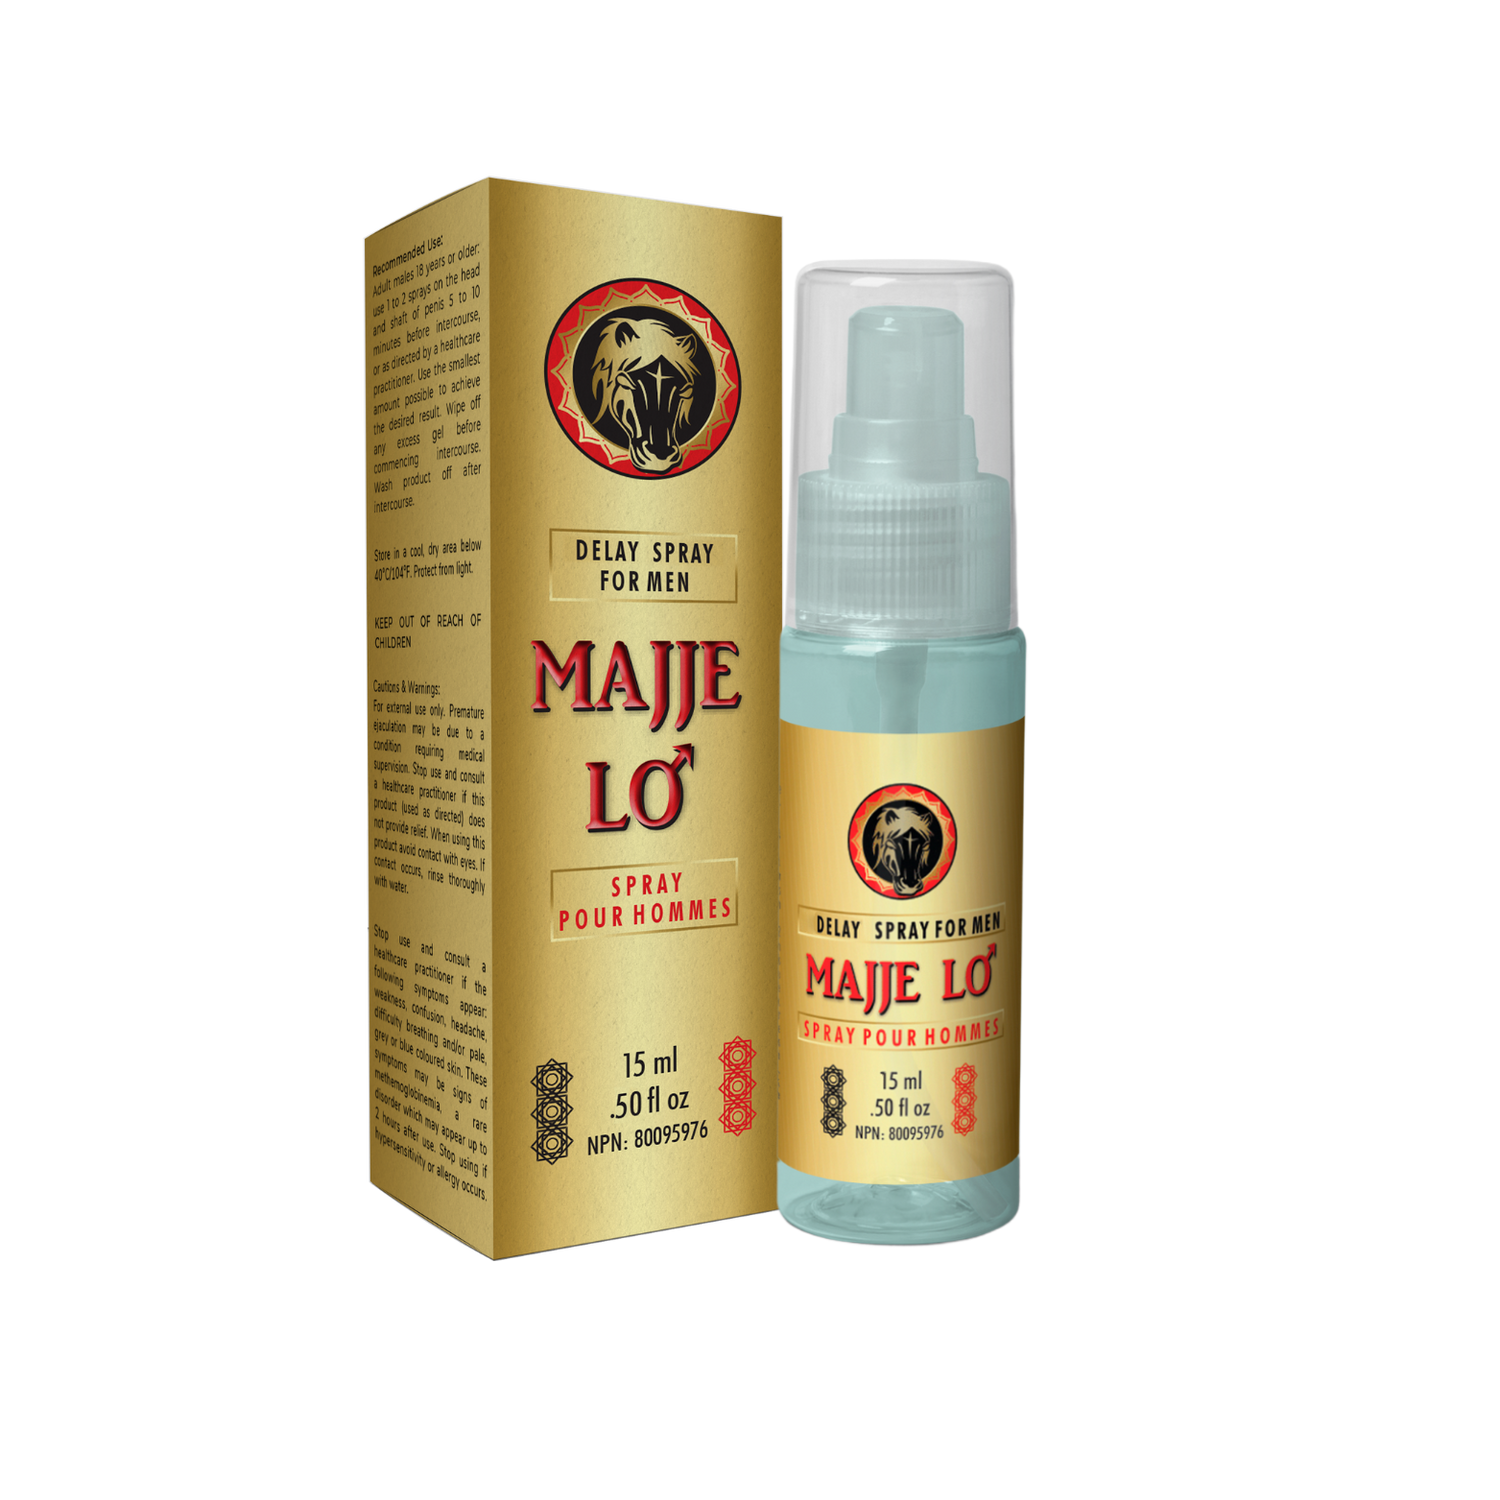 Majjelo delay spray front side with packaging